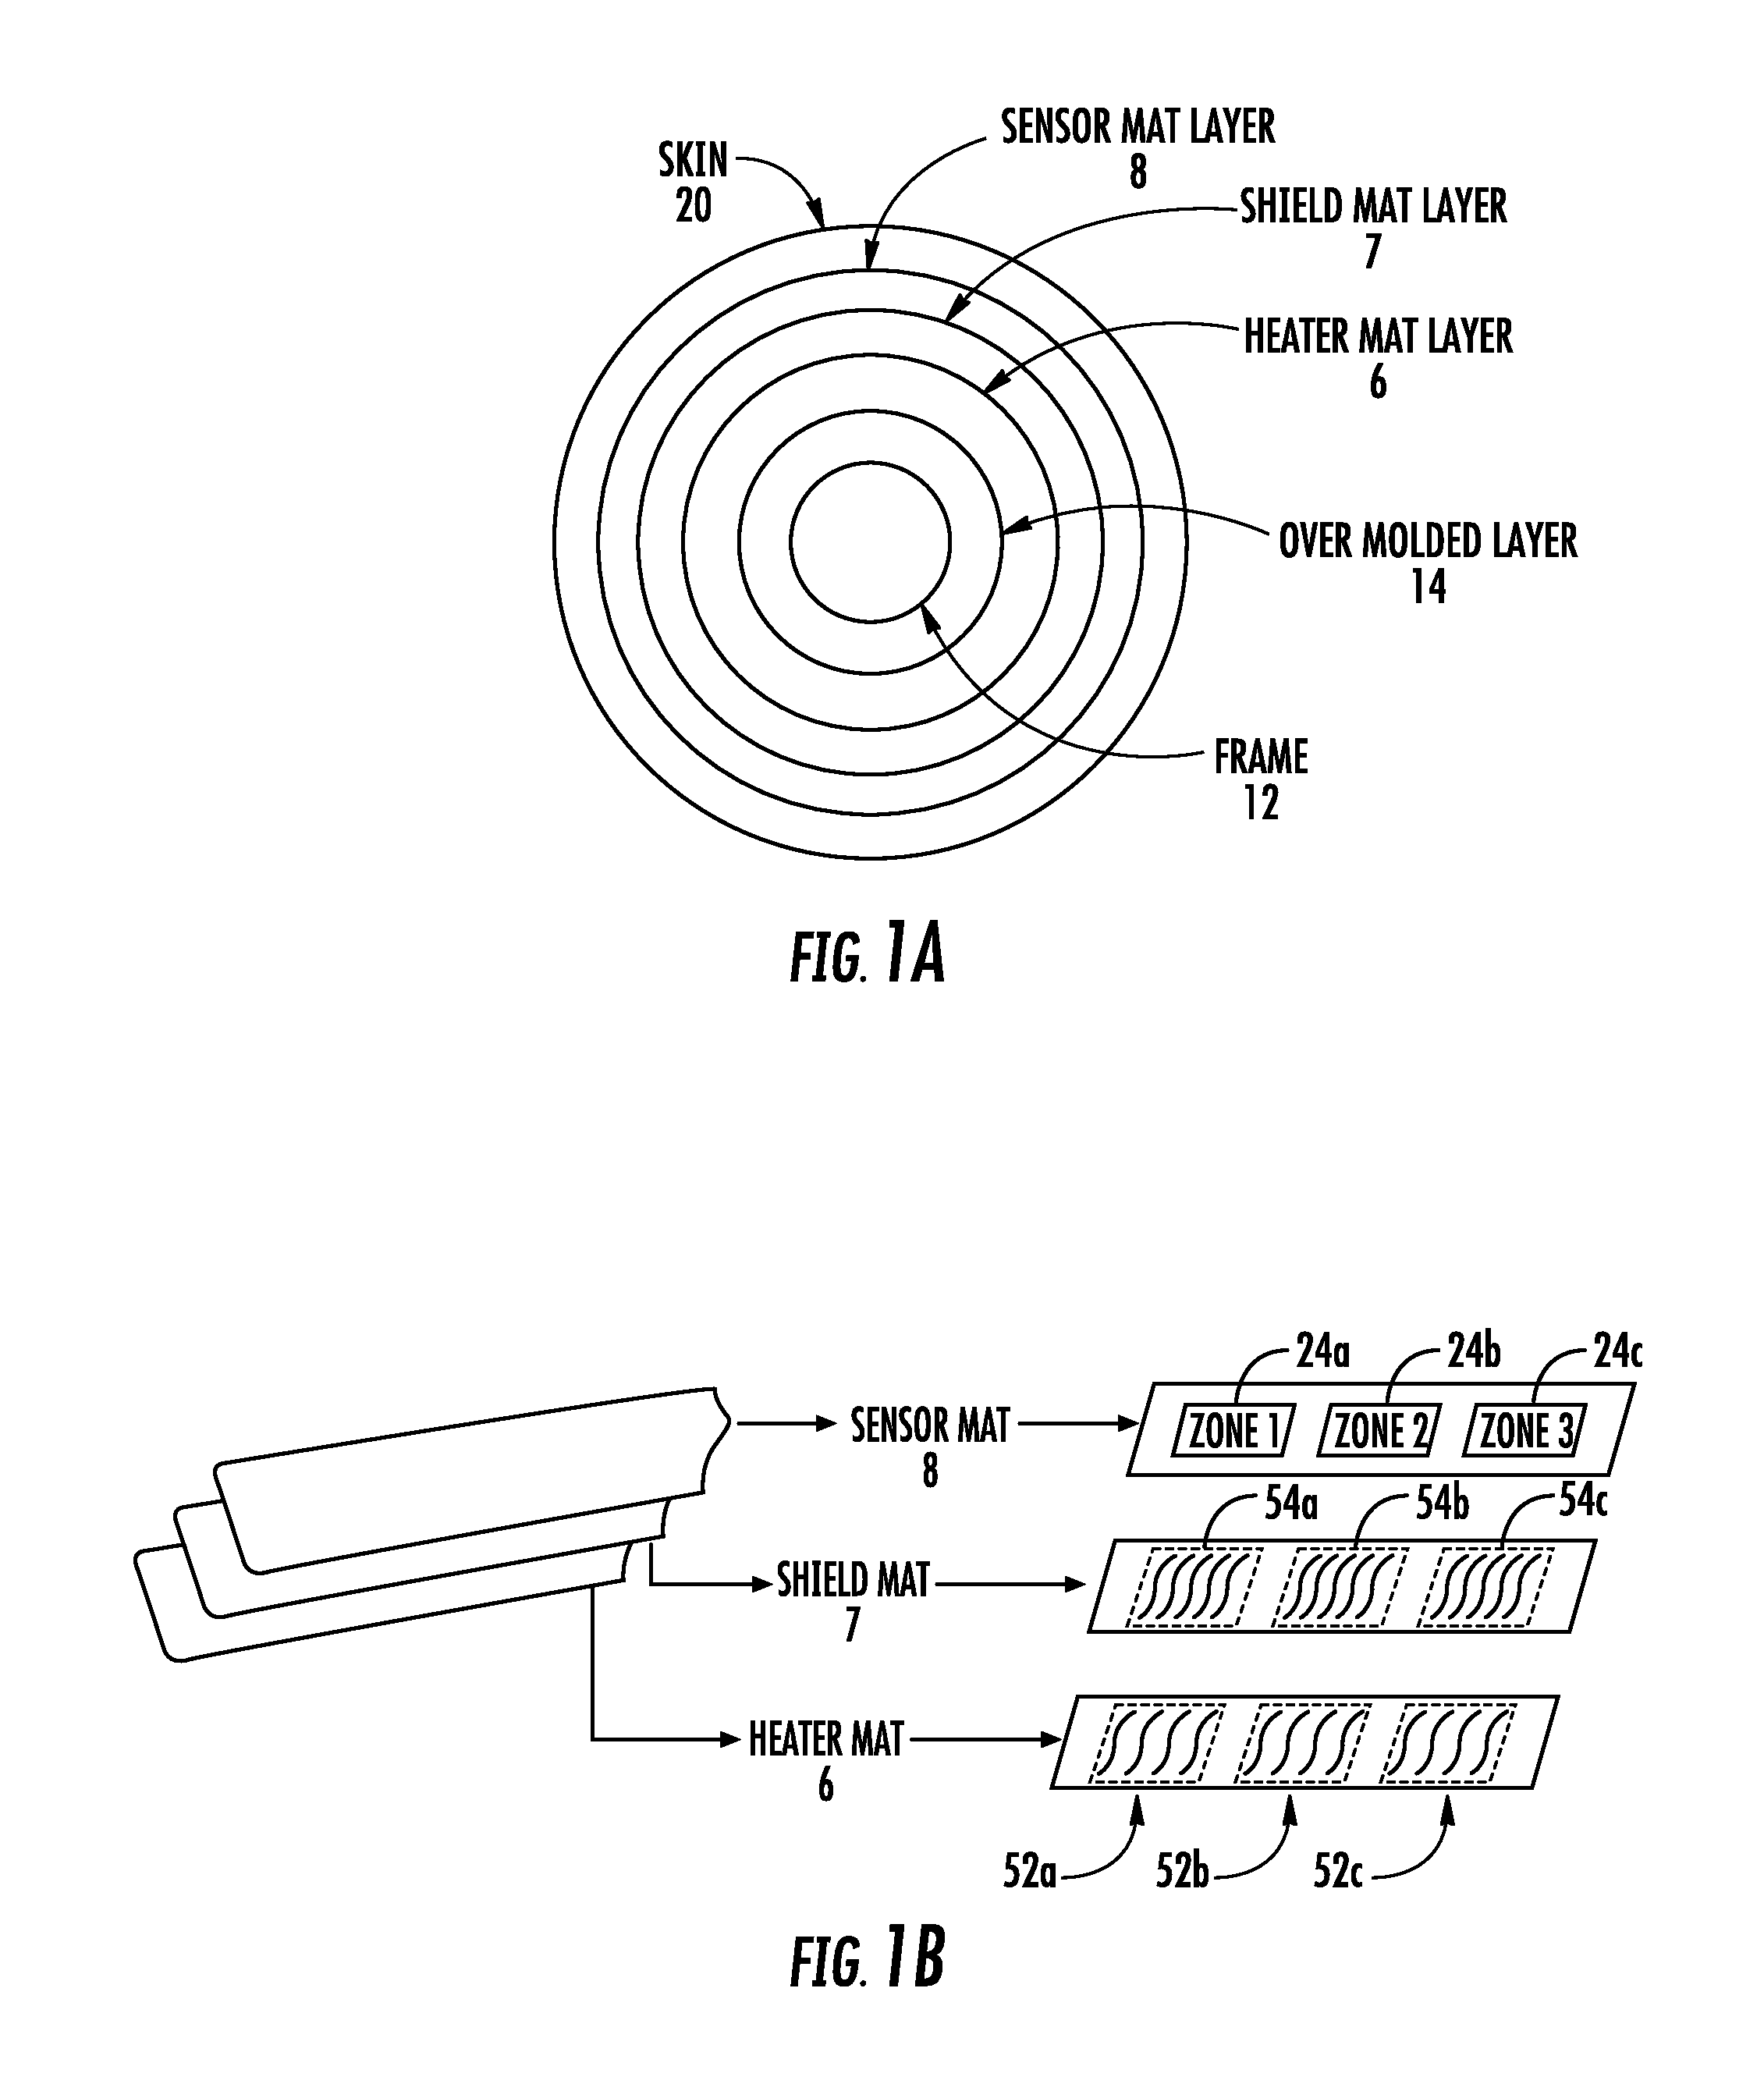 Systems and methods for shielding a hand sensor system in a steering wheel